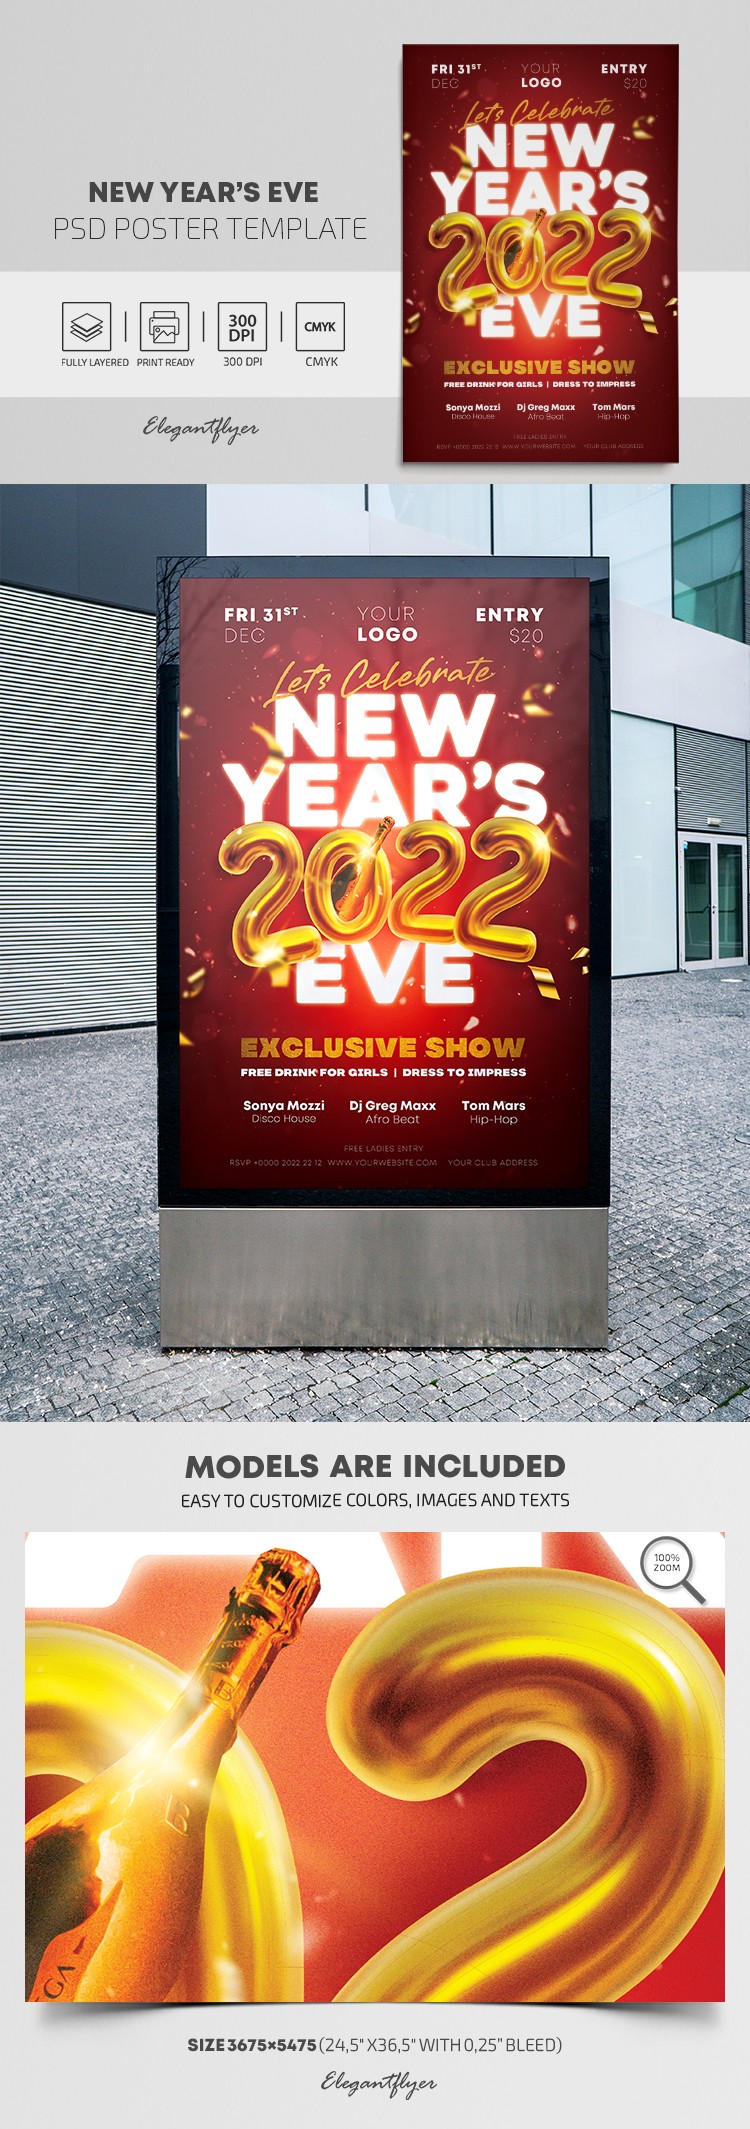 New Year's Eve Poster by ElegantFlyer